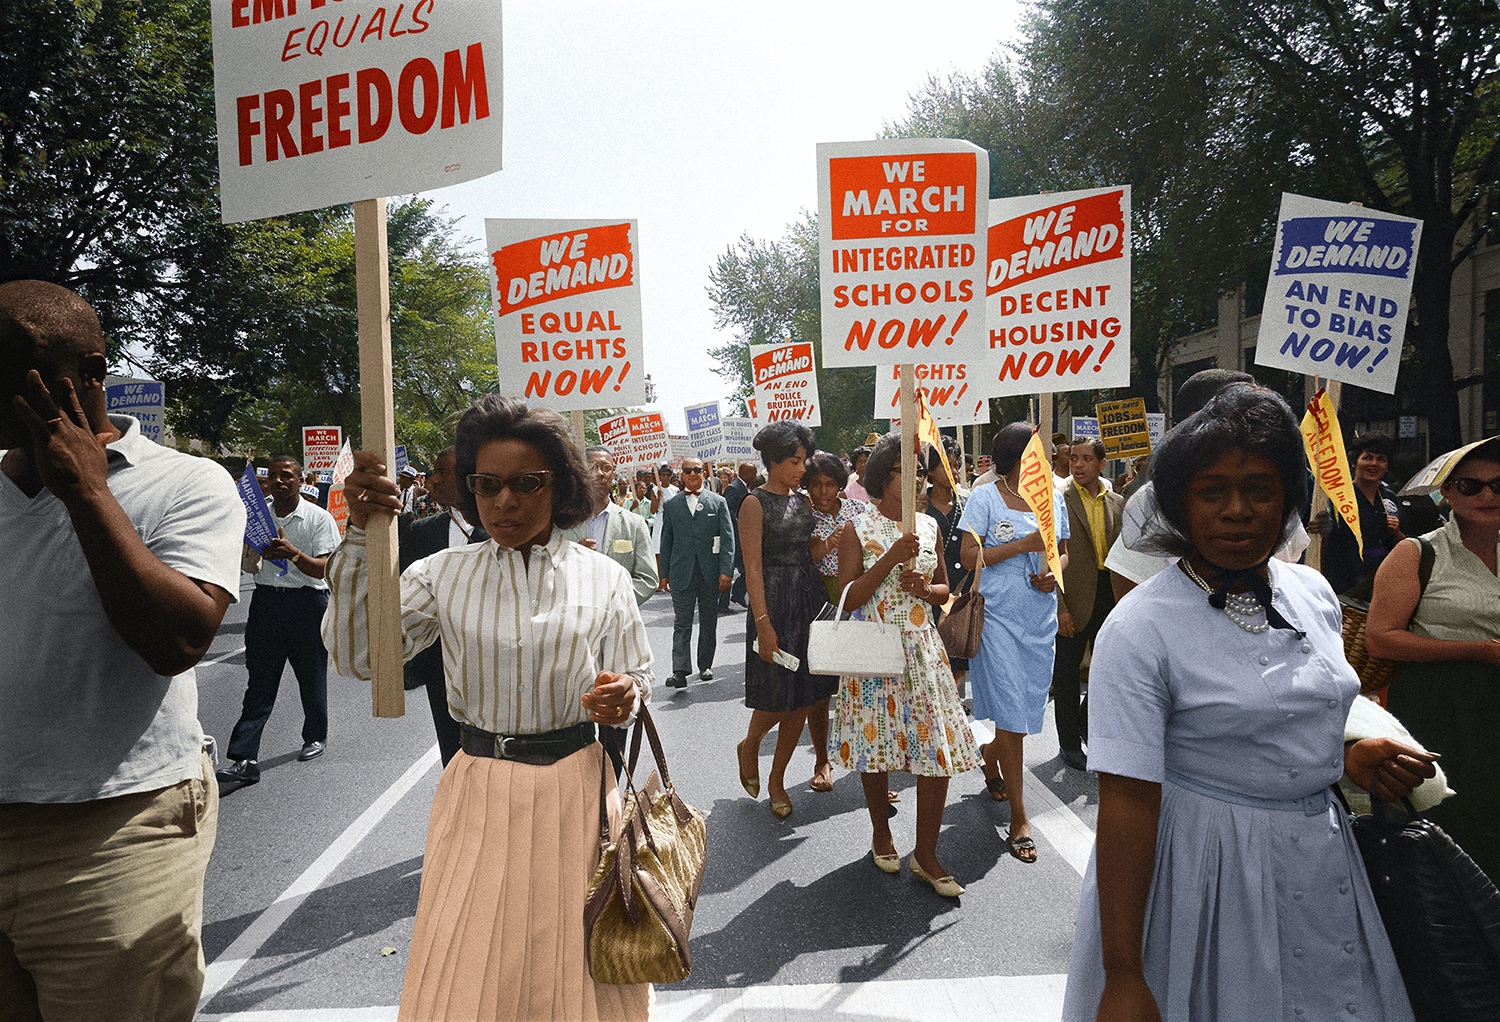 "Civil rights march on Washington, D.C. / [WKL]." Original black and white negative by Warren K. Leffler. Taken August 28th, 1963, Washington D.C, United States (@libraryofcongress). Colorized by Jordan J. Lloyd. Library of Congress Prints and Photographs Division Washington, D.C. 20540 USA 